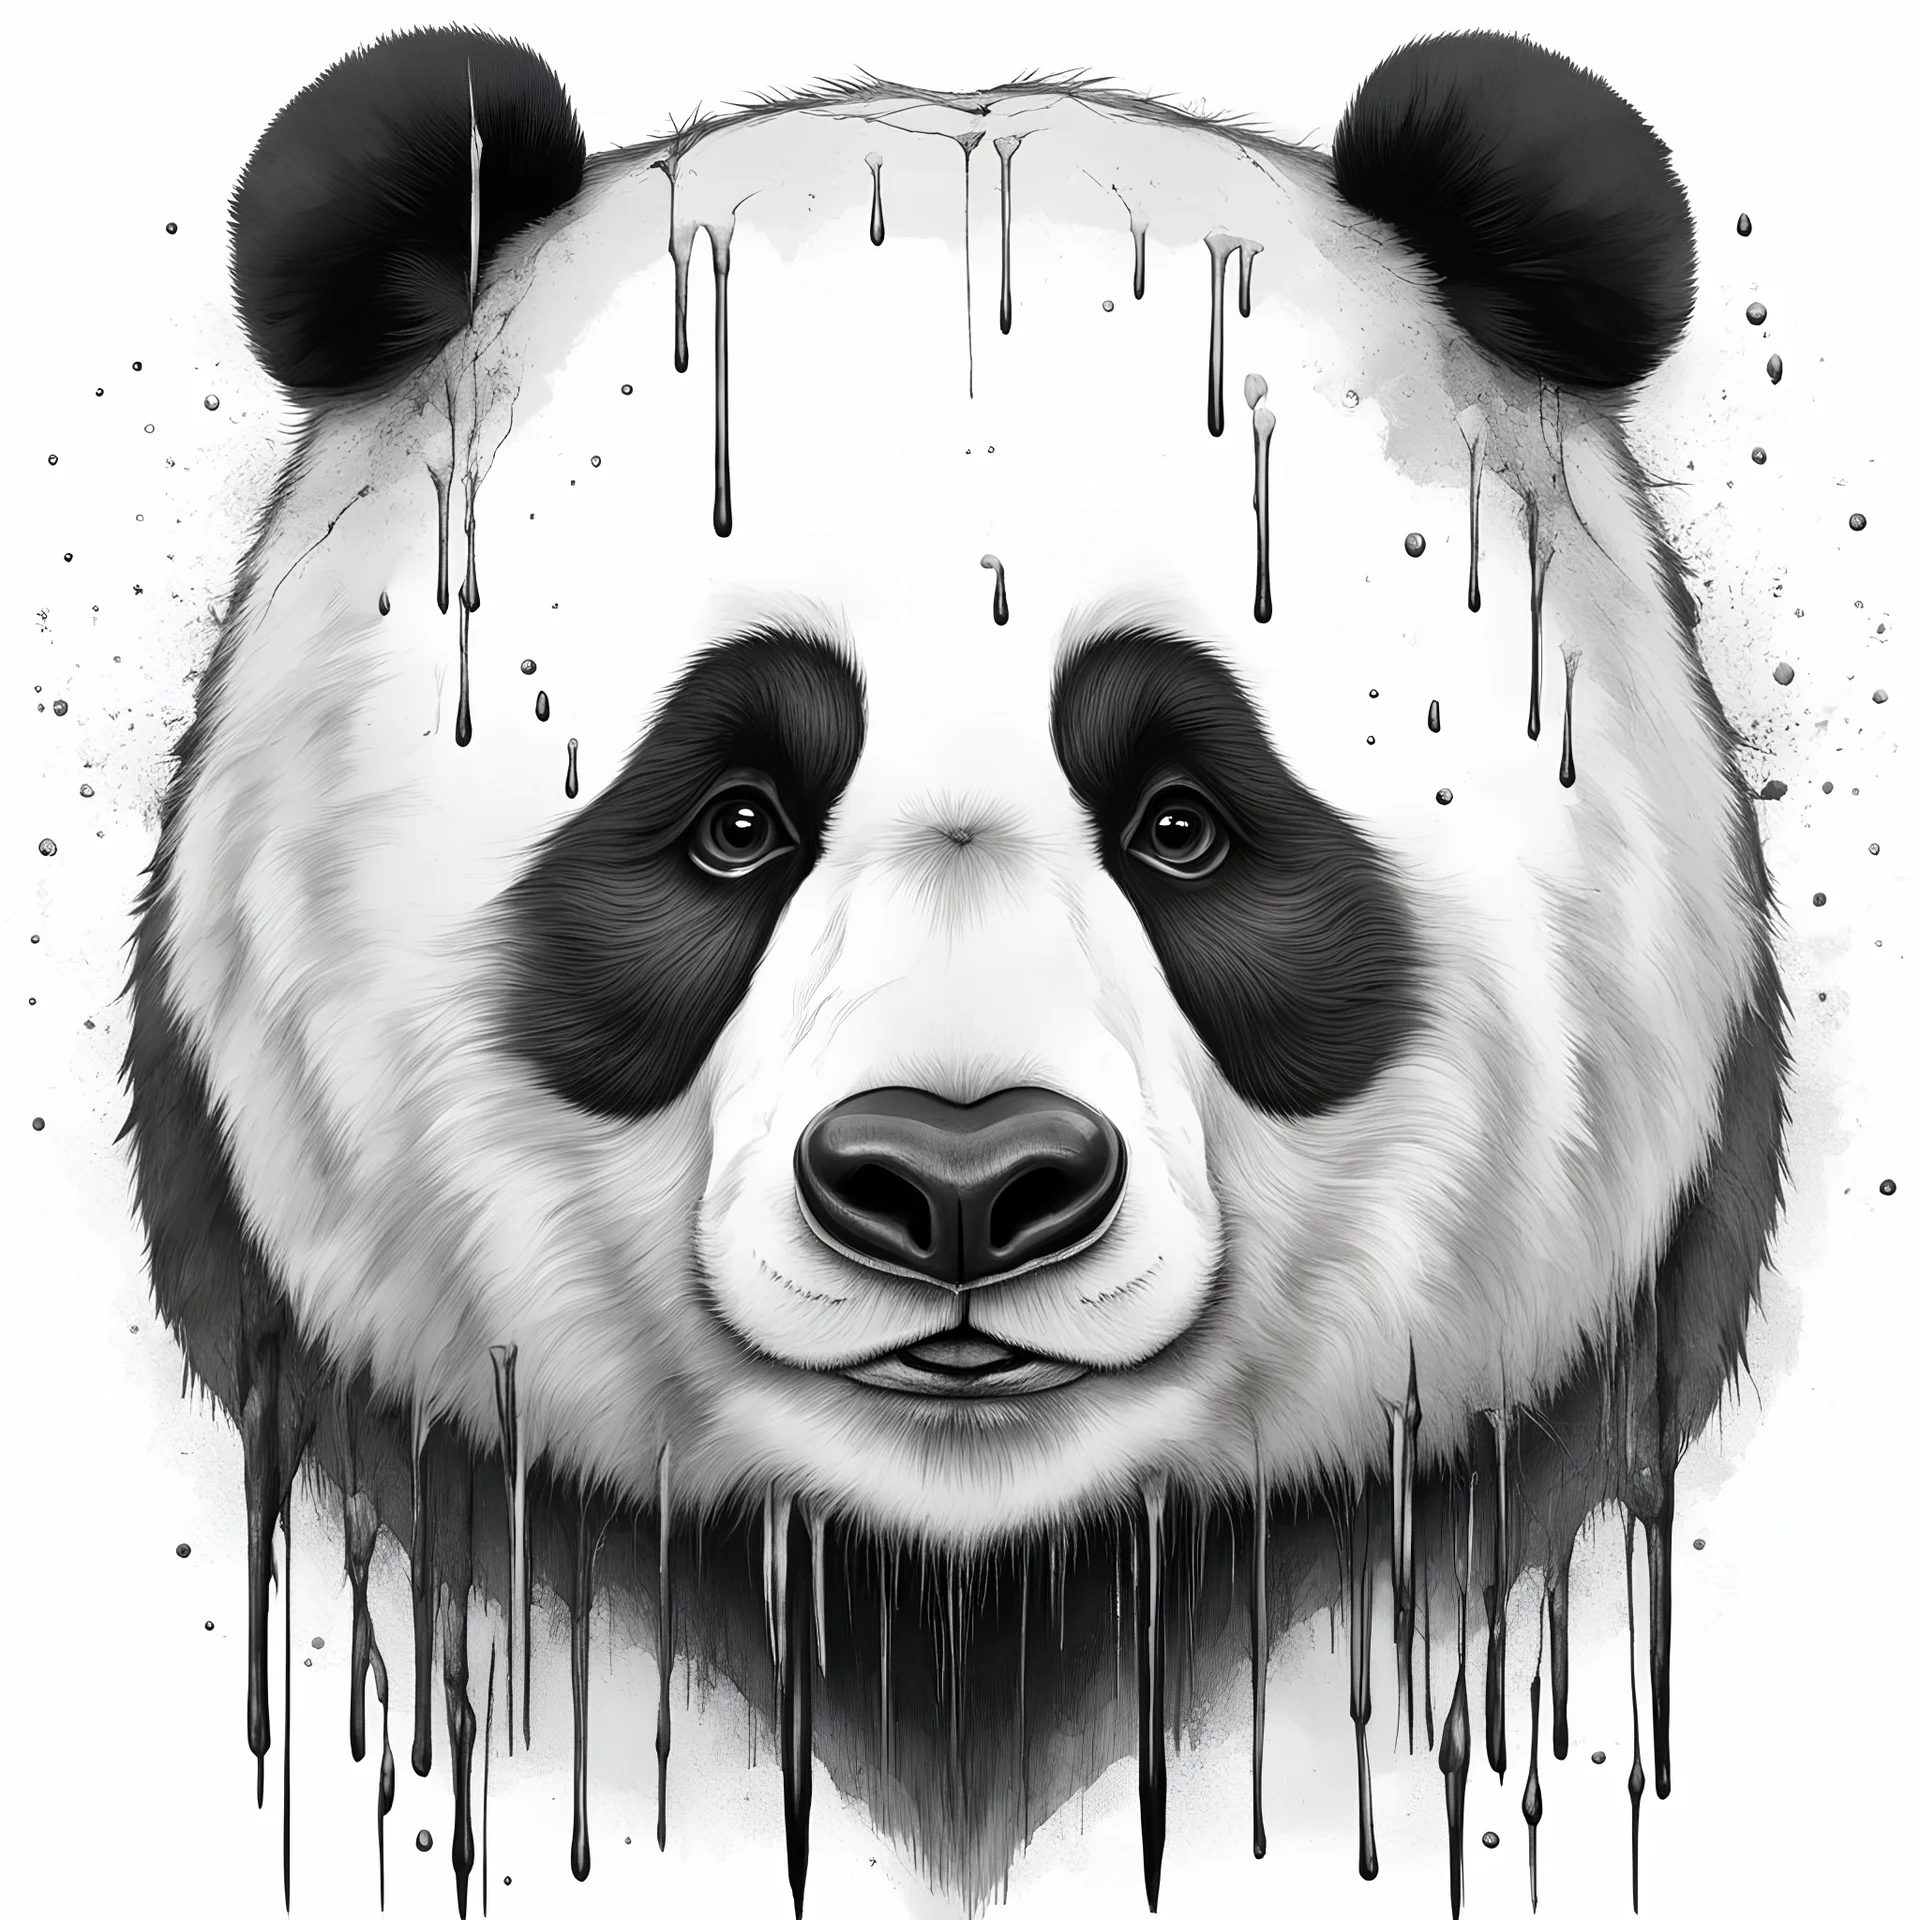 a large portrait front view of a sad panda head with tears from eyes, grief, melancholy, high quality, highly detailed, pure white background